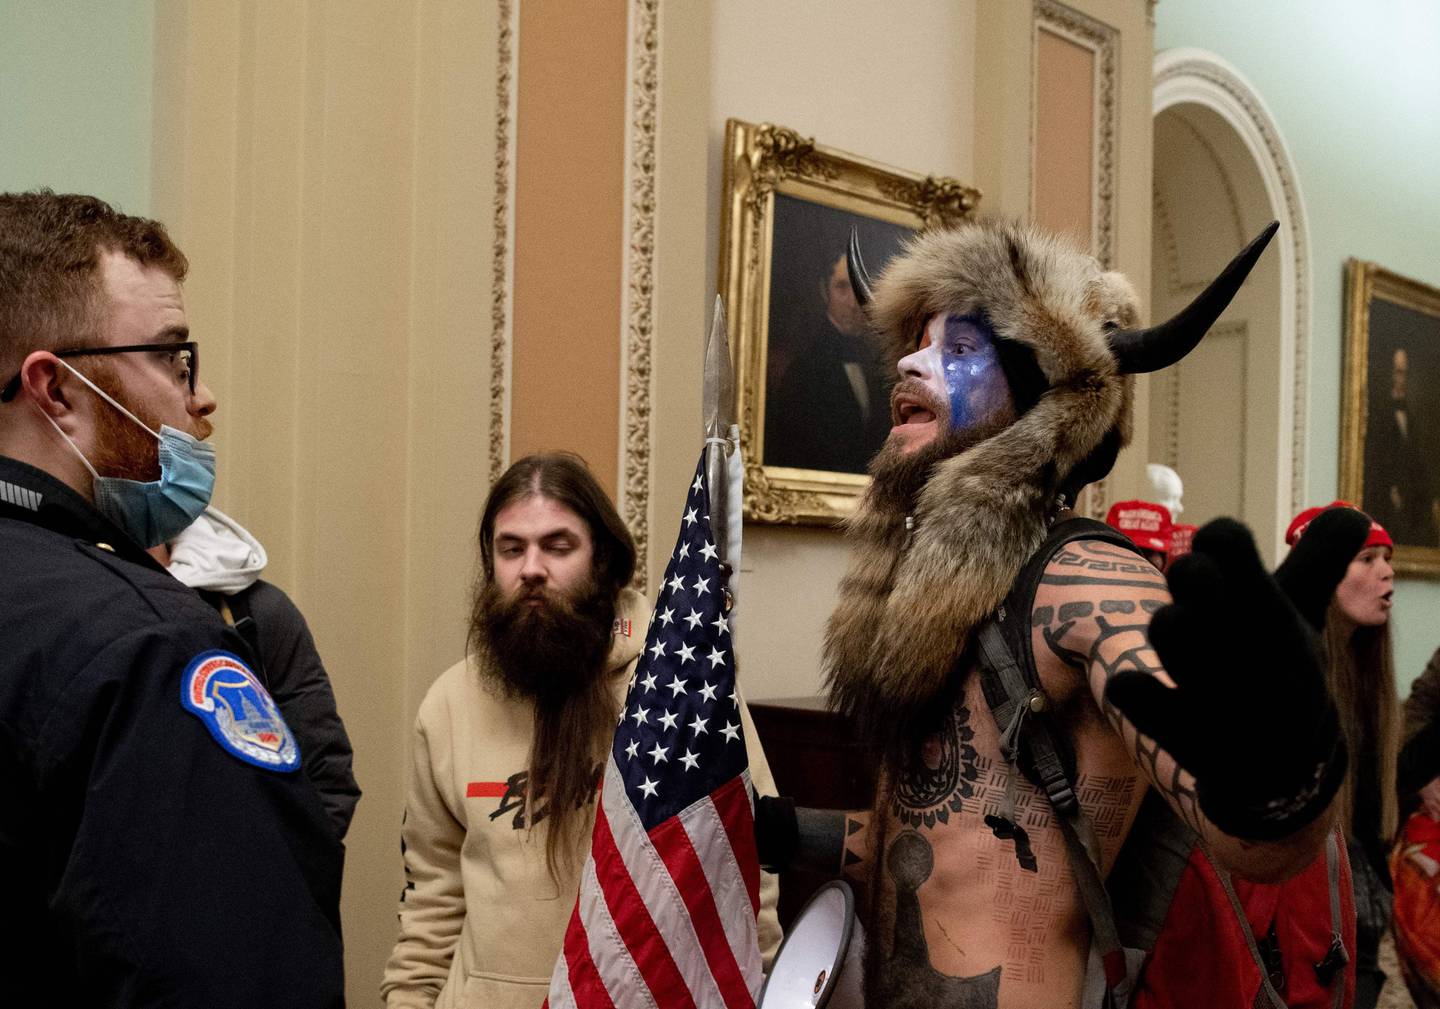 Supporters of US President Donald Trump confront Capitol police officers at the US Capitol on January 6, 2021, in Washington, DC. - Demonstrators breeched security and entered the Capitol as Congress debated the a 2020 presidential election Electoral Vote Certification. (Photo by SAUL LOEB / AFP)